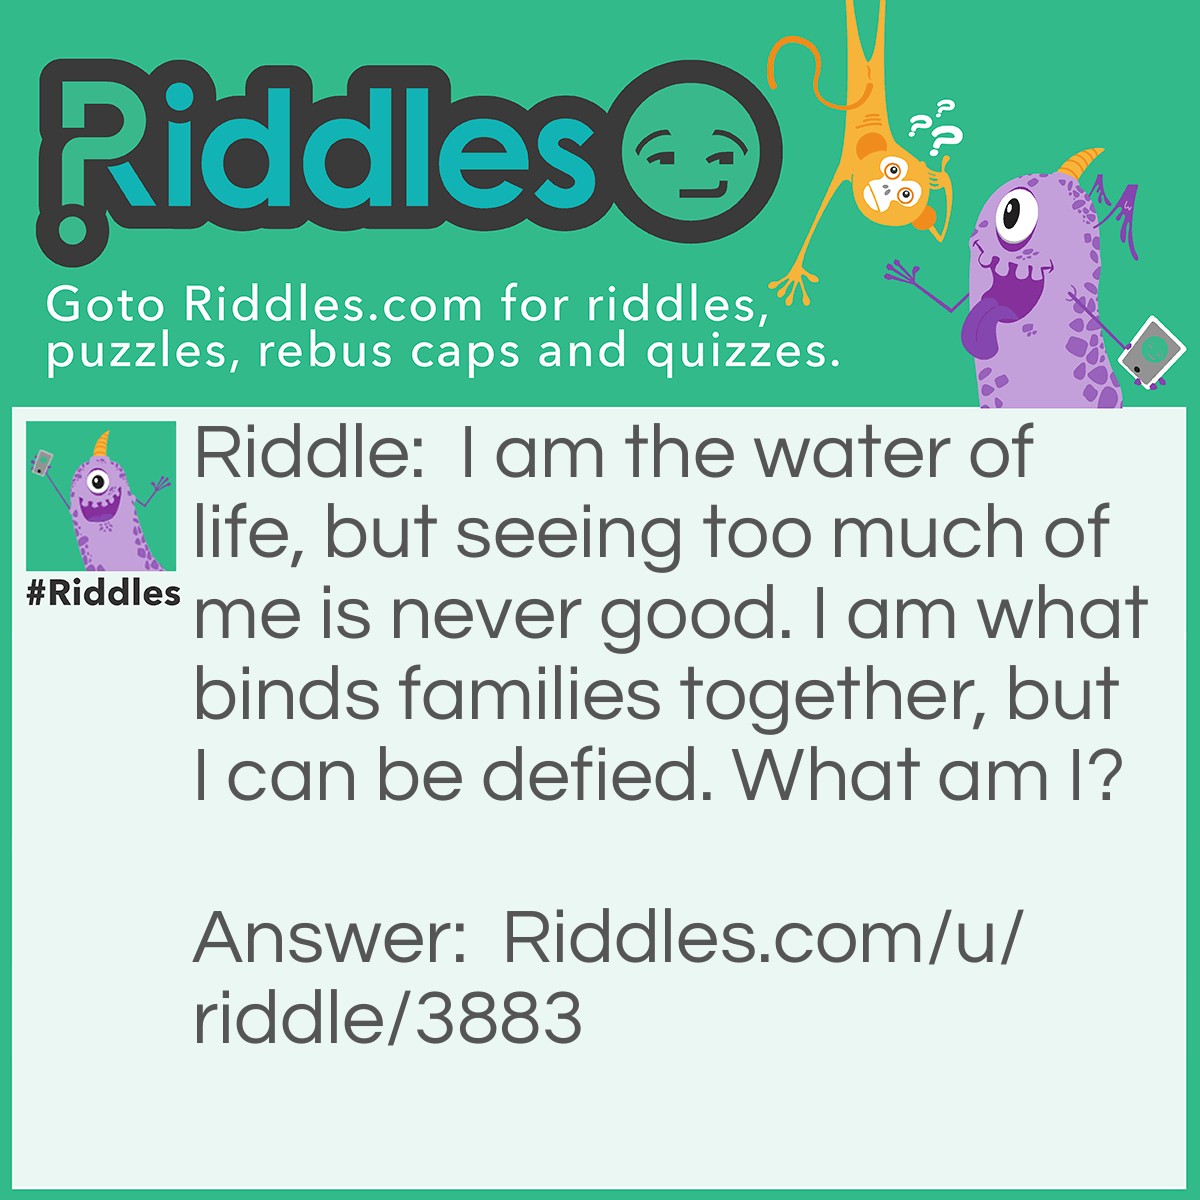 Riddle: I am the water of life, but seeing too much of me is never good. I am what binds families together, but I can be defied. What am I? Answer: Blood.